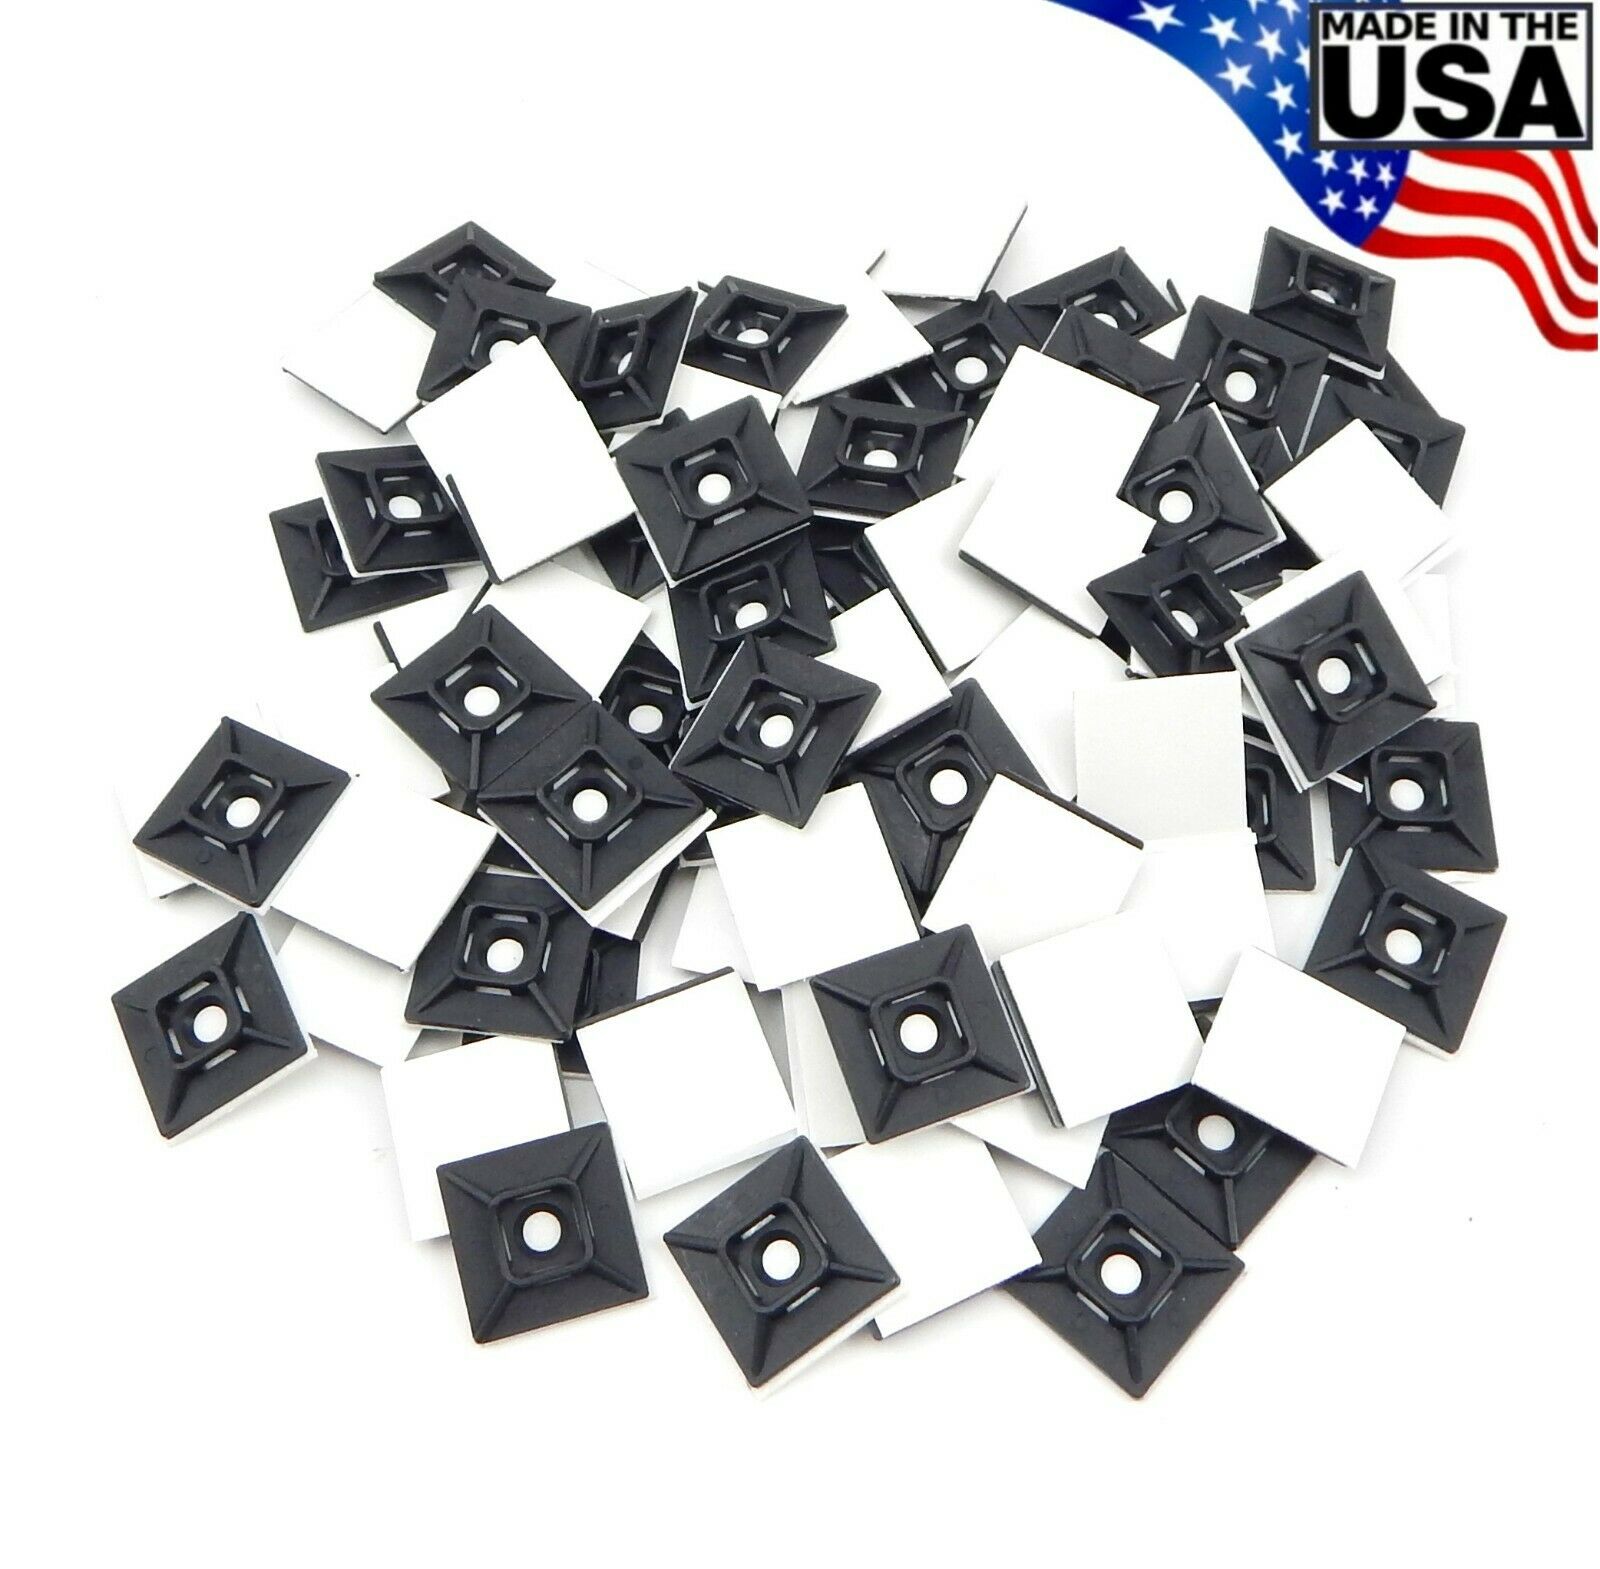 Zip Cable Tie Adhesive Mounting Base Pad 1" 100pc Made In Usa Mount